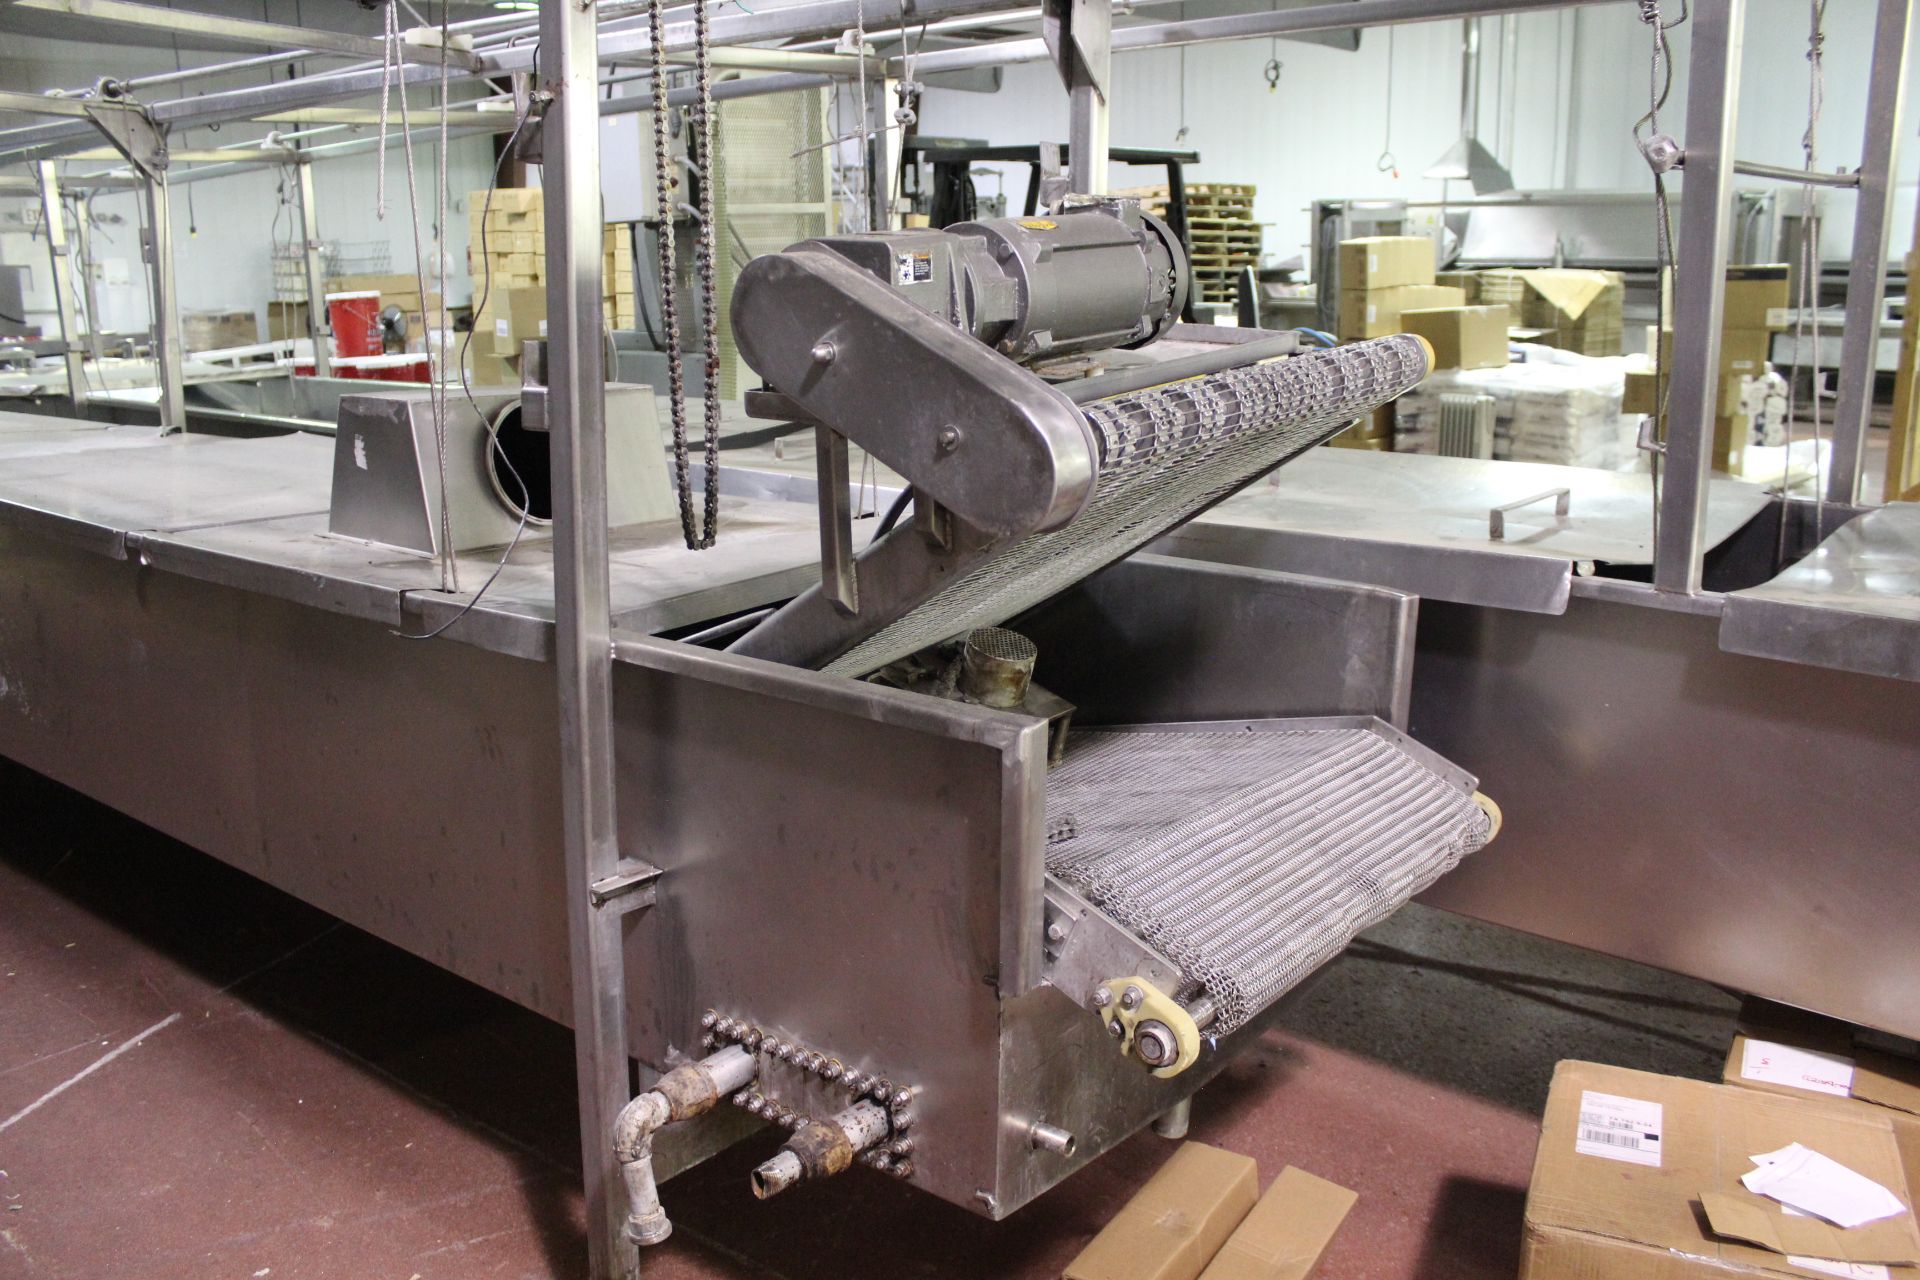 Stainless Steel Continuous Submersion Cooking Conveyor with Top Hold Down Belt, 30" Belts, 35"W X 23 - Image 4 of 4